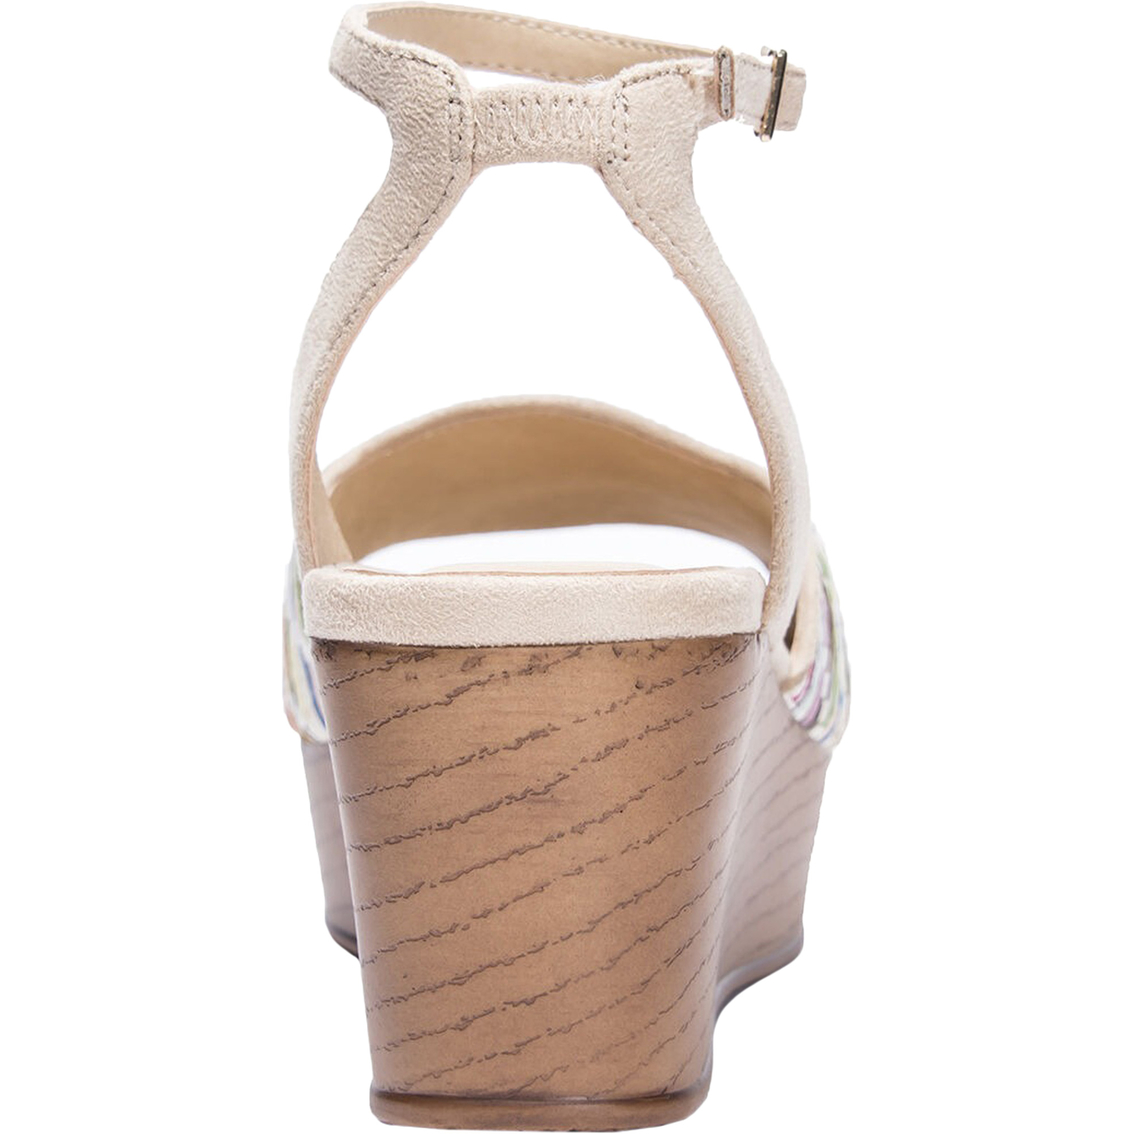 CL By Laundry Charlise Wedge Sandals - Image 5 of 5